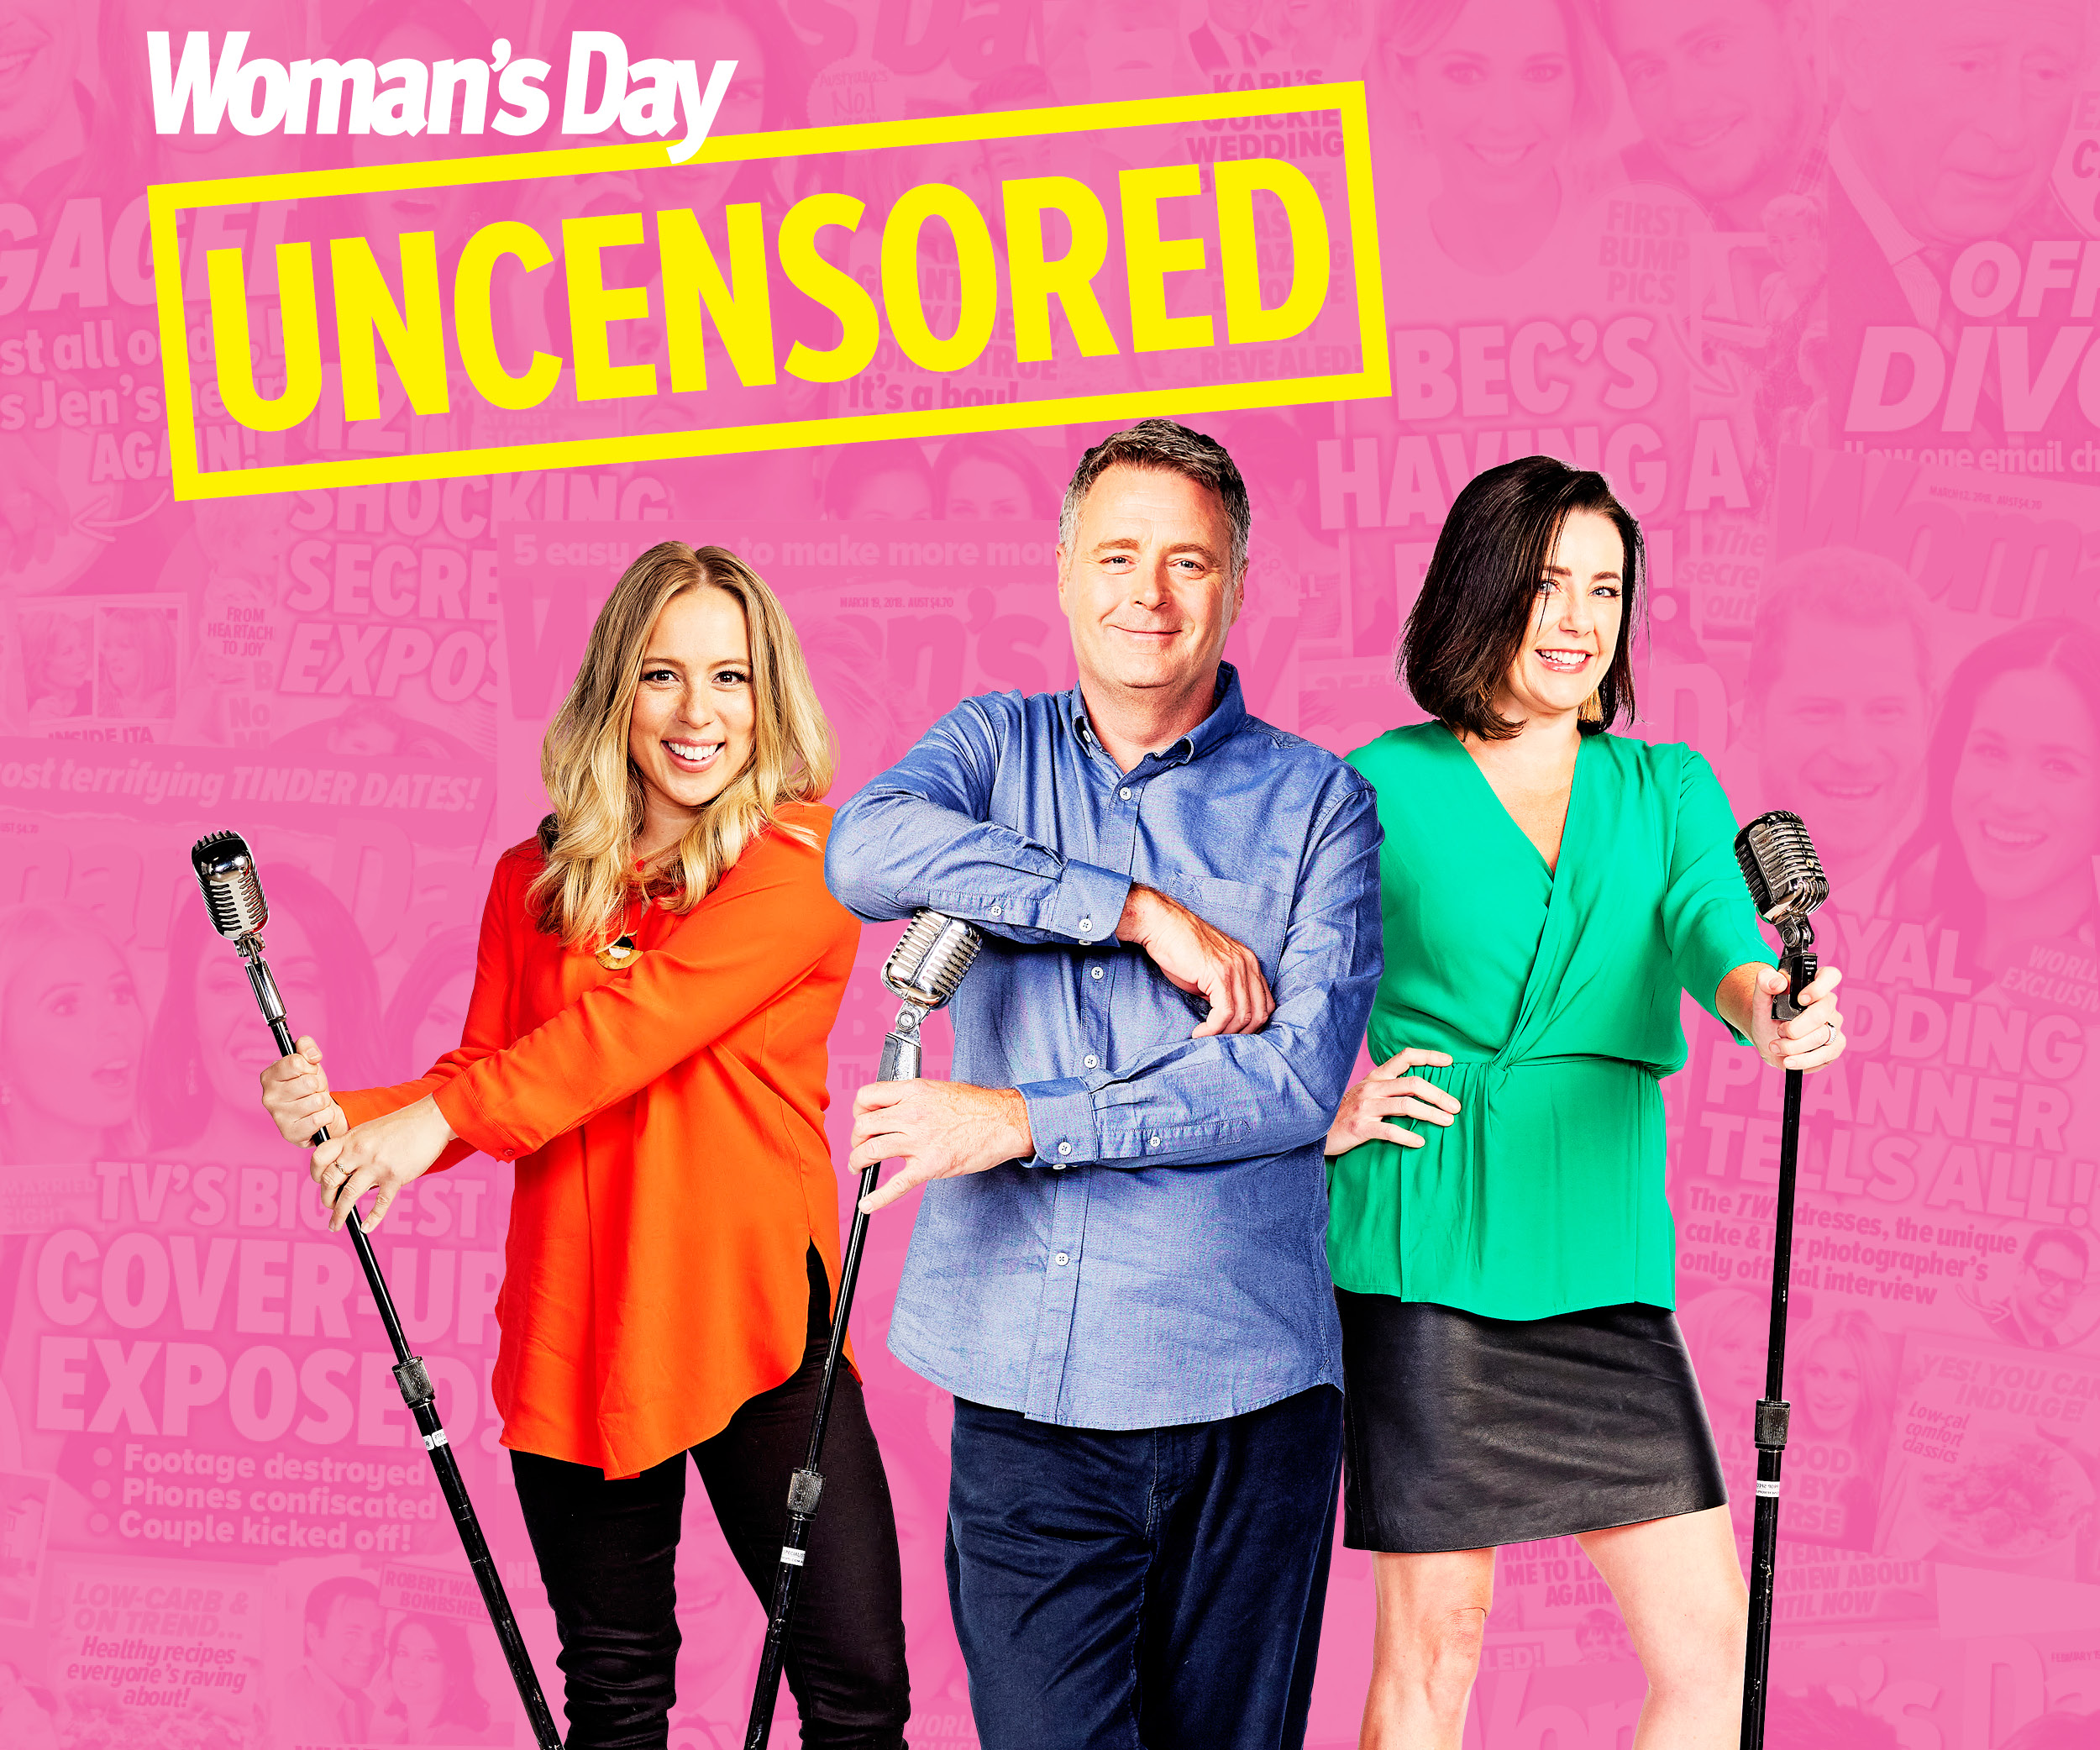 Woman's Day uncensored 